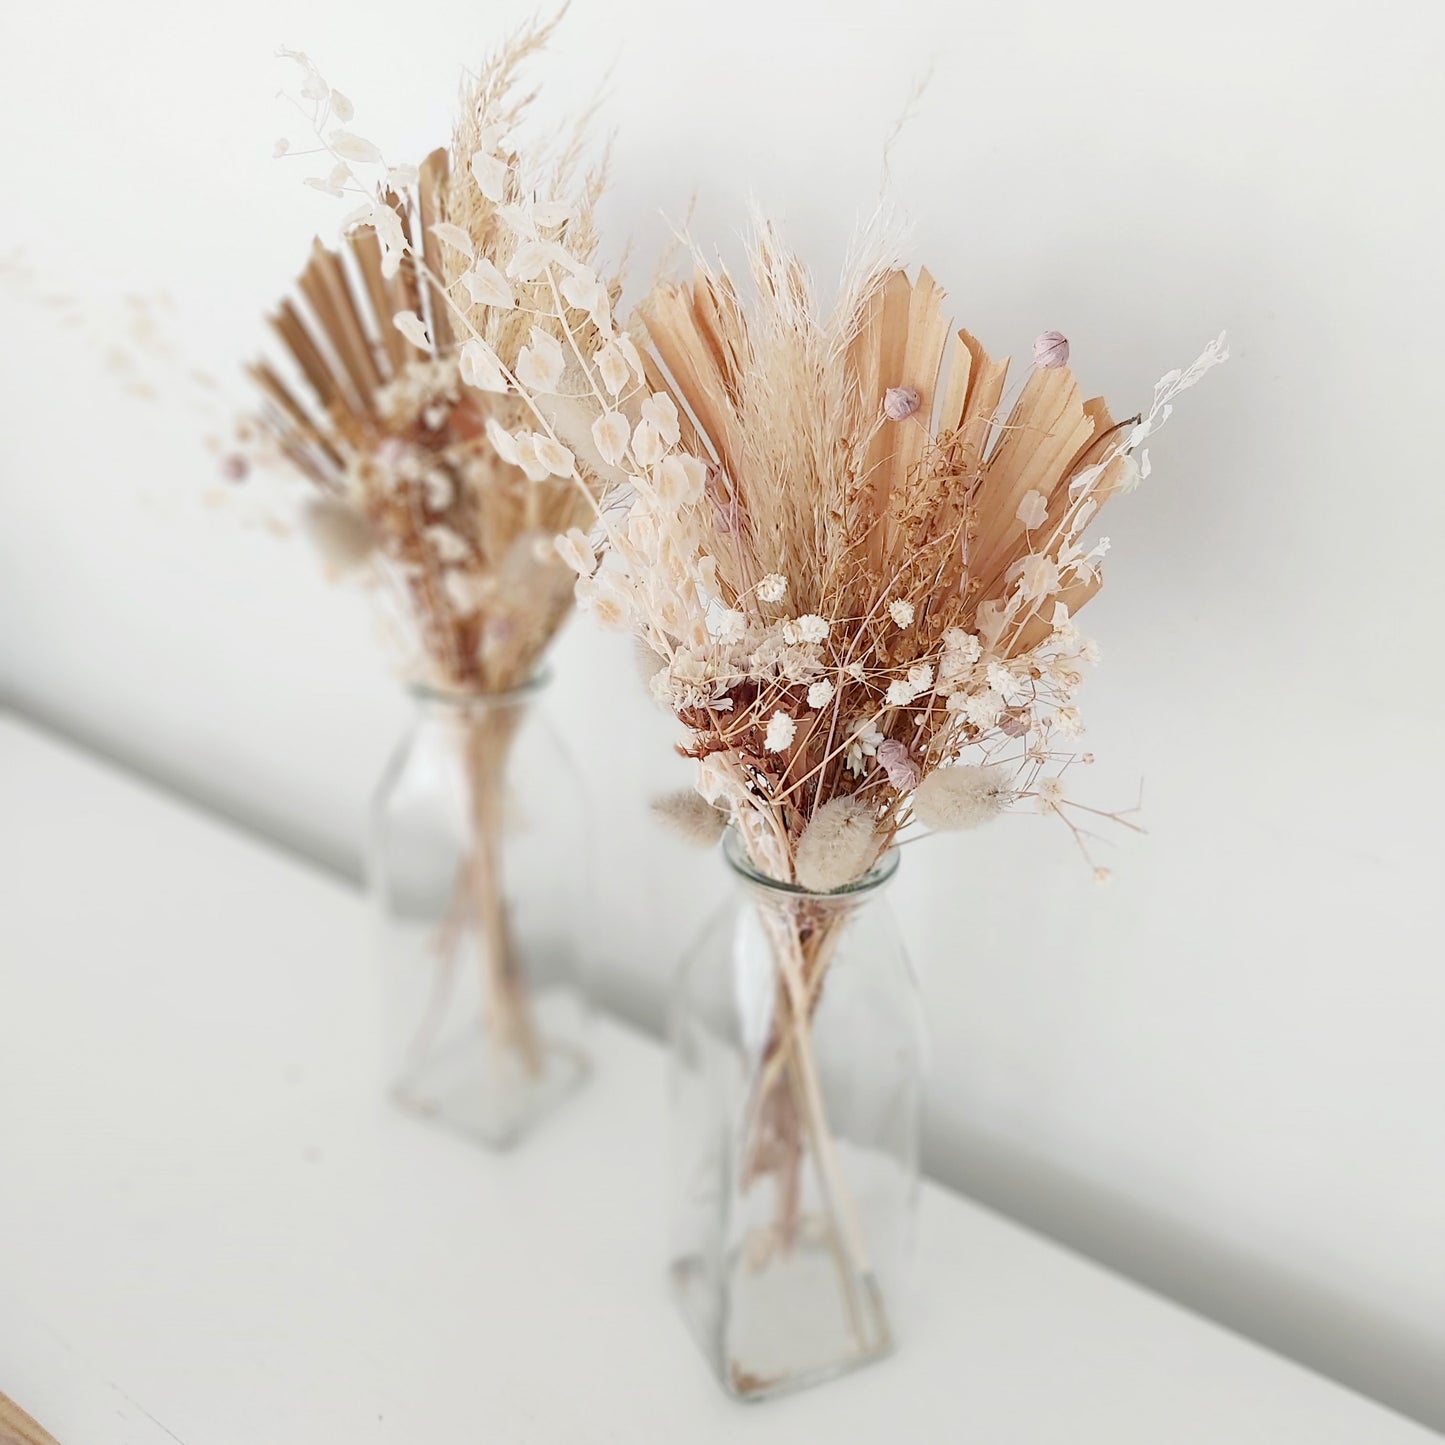 Dried floral posies in glass vases